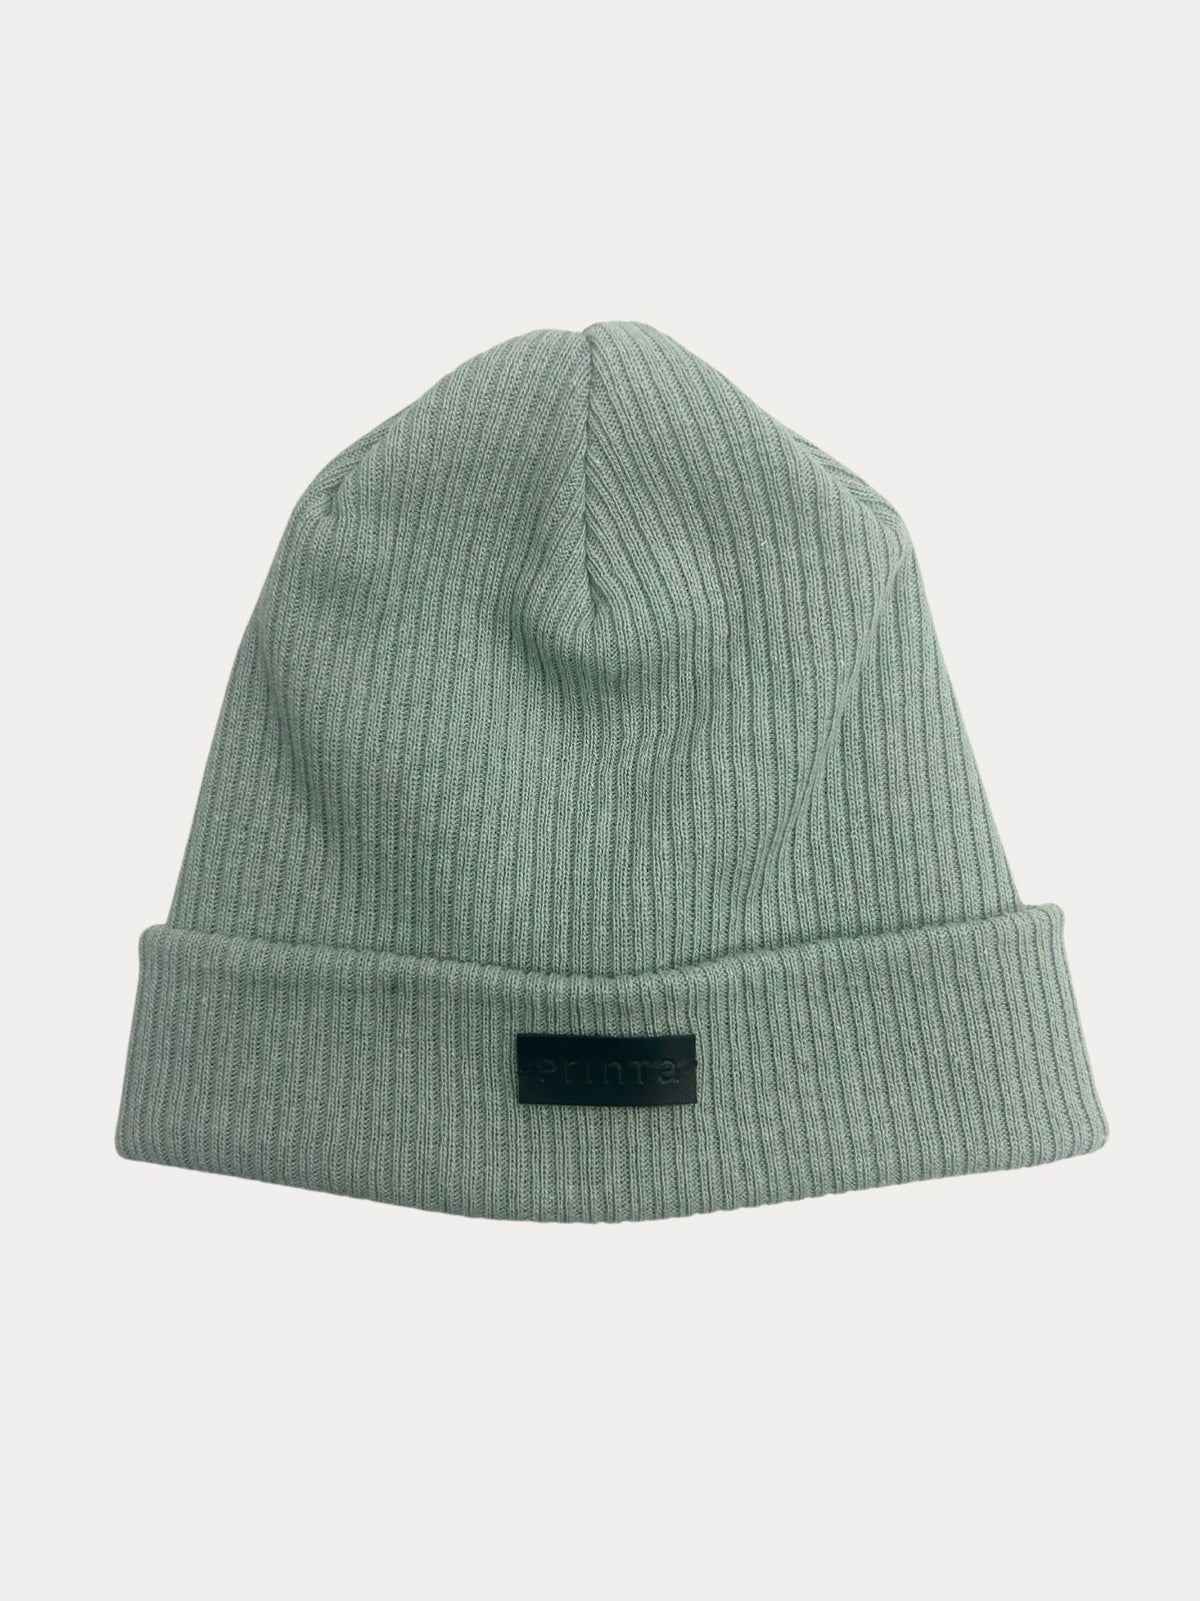 Mint knitted cap